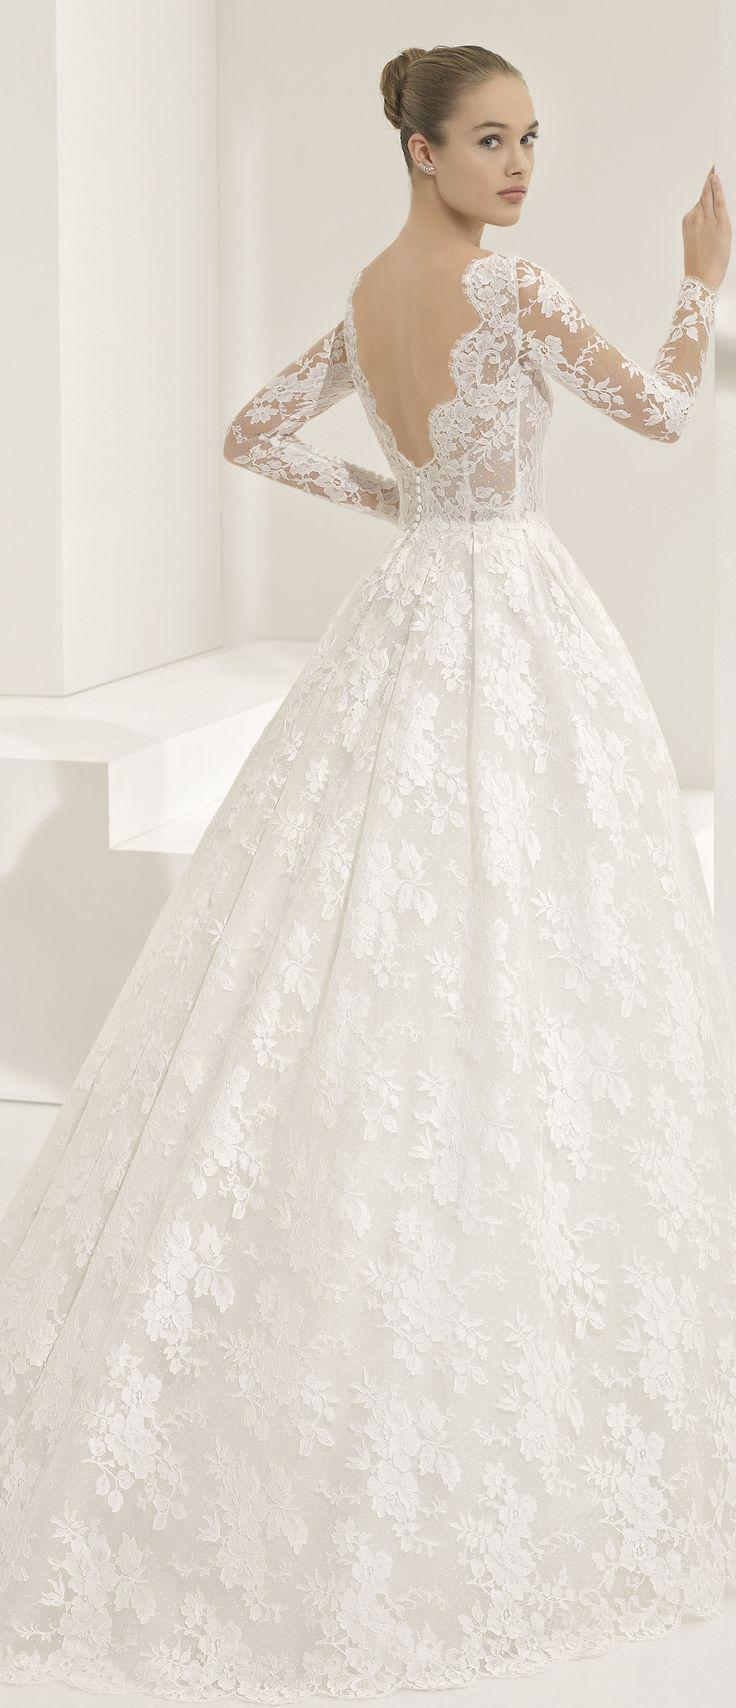 Wedding - Rosa Clará Couture 2018 Bridal Collection: A Line Up Of Stunning Statement Backs